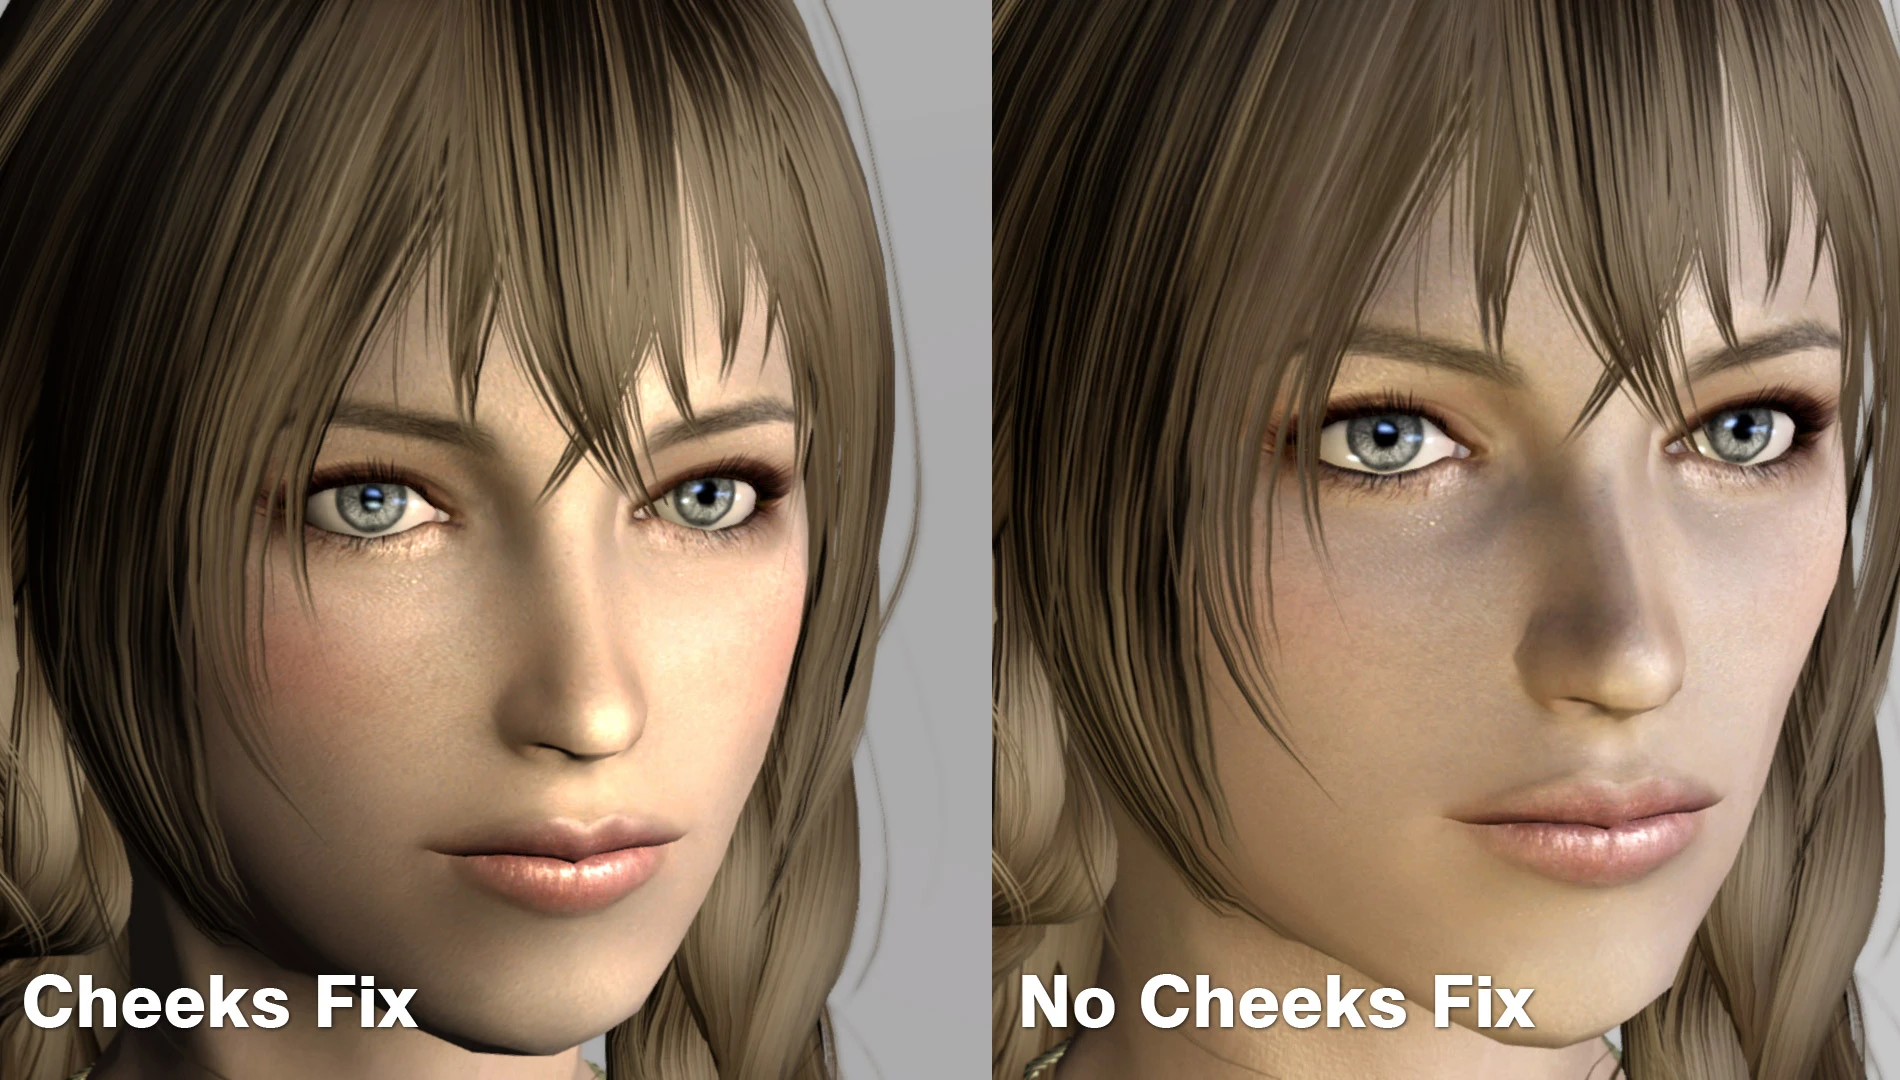 skyrim special edition character creation mod